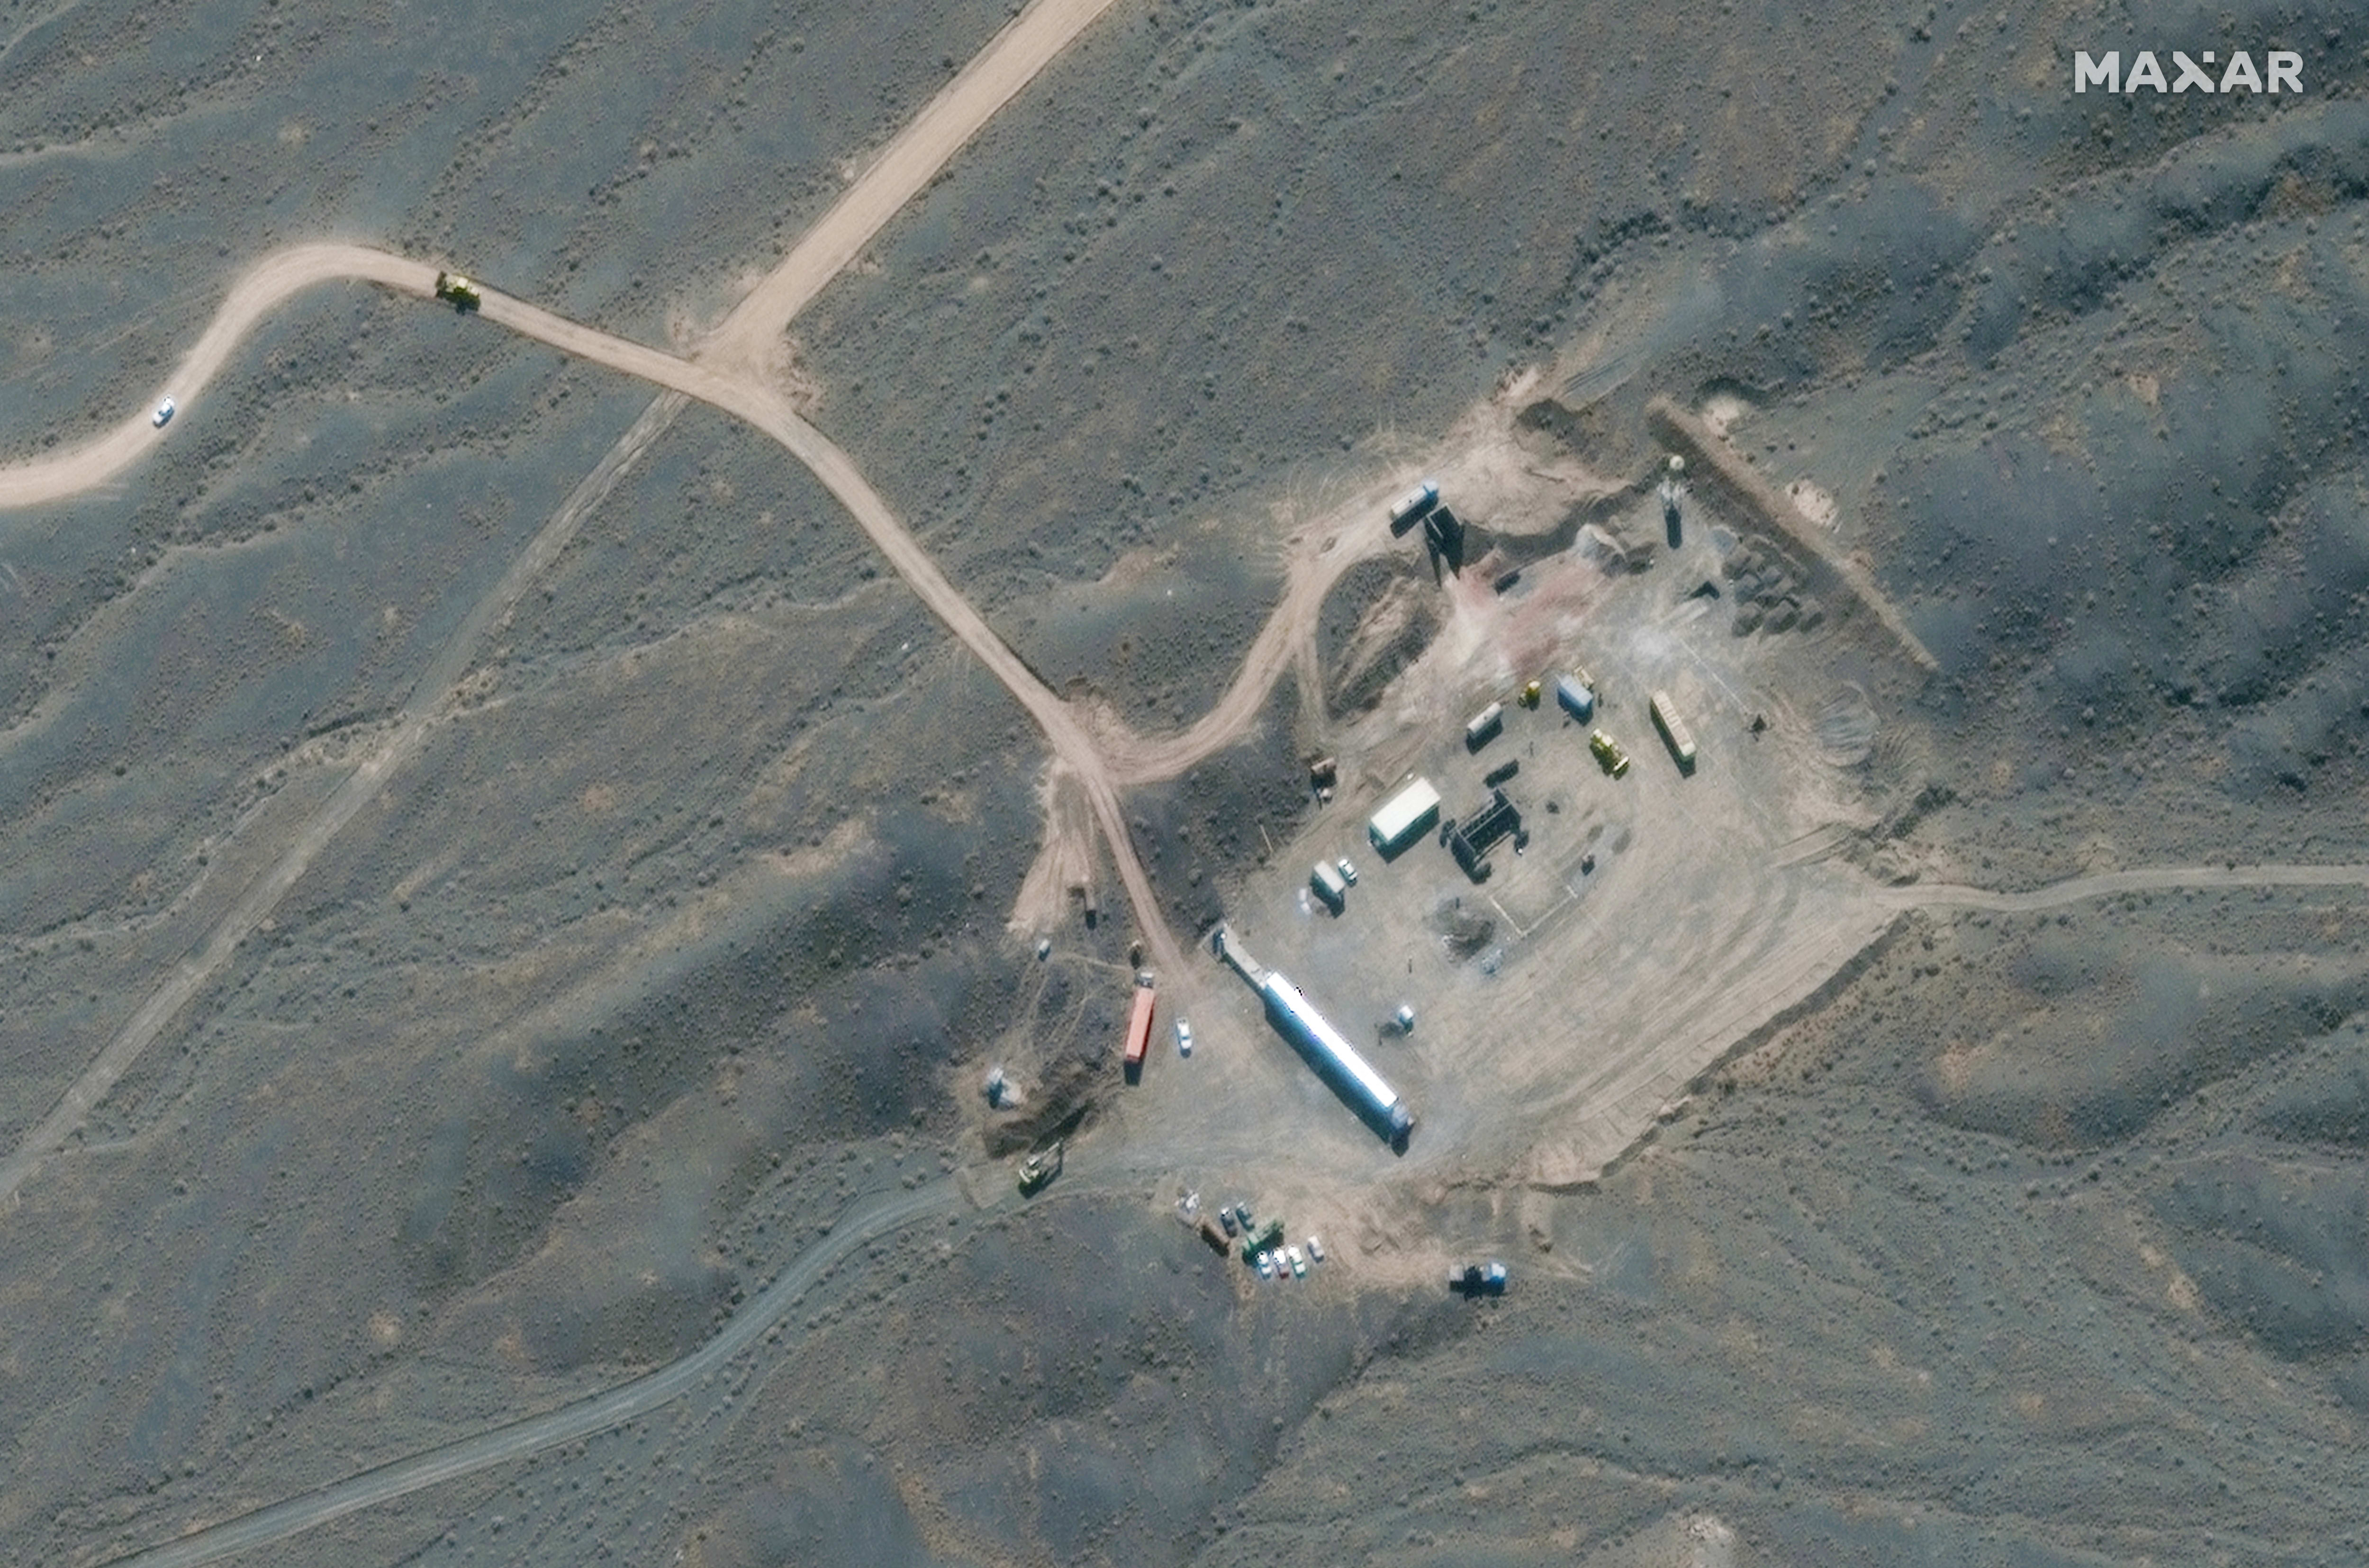 Satellite image provided by Maxar Technologies on 28 January 28, 2020, showing an overview of Iran's Natanz nuclear facility, south of the capital Tehran.